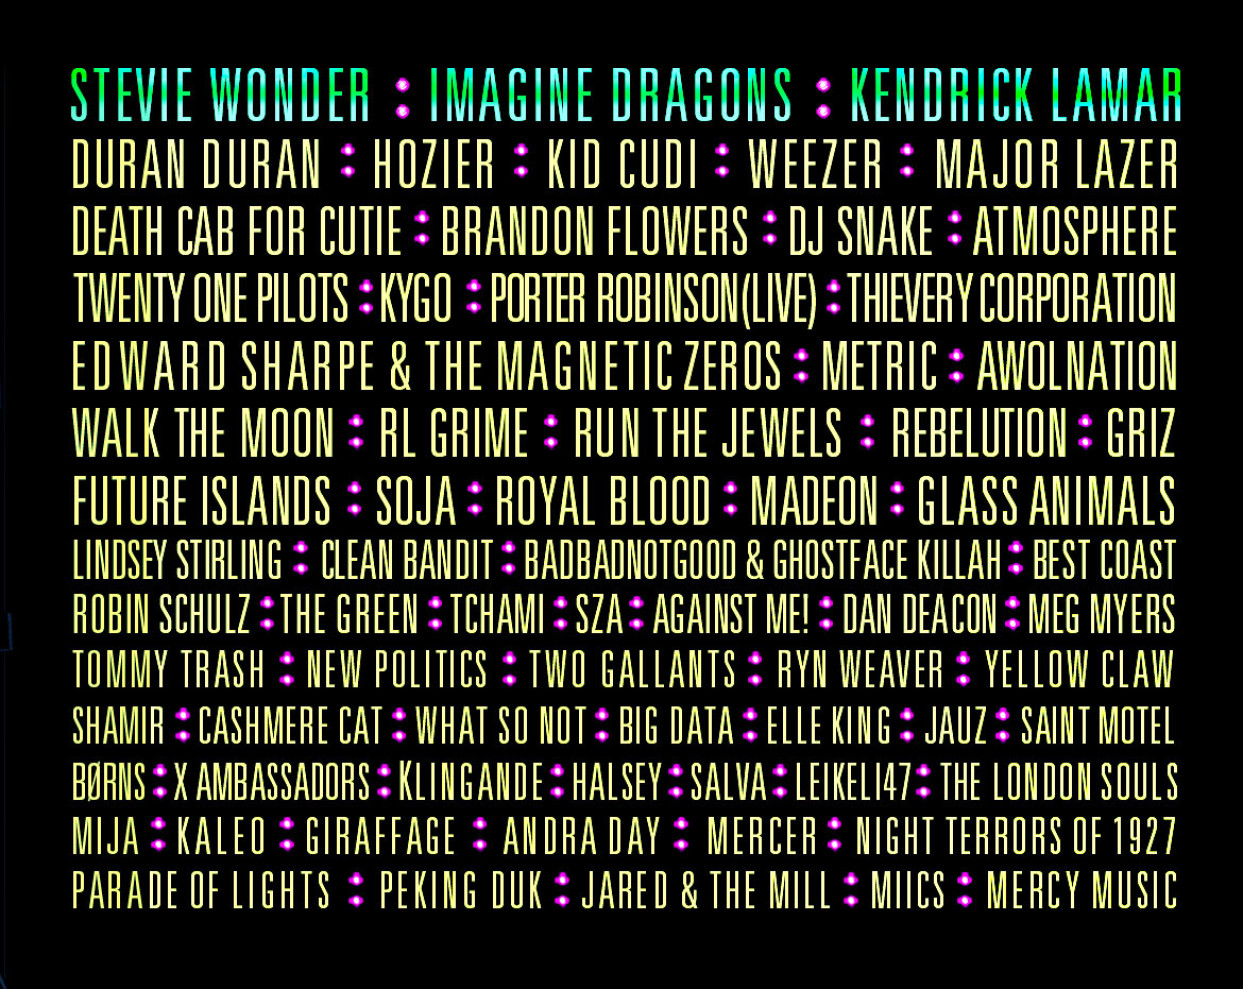 2015 LIFE IS BEAUTIFUL FESTIVAL ANNOUNCES LINEUP